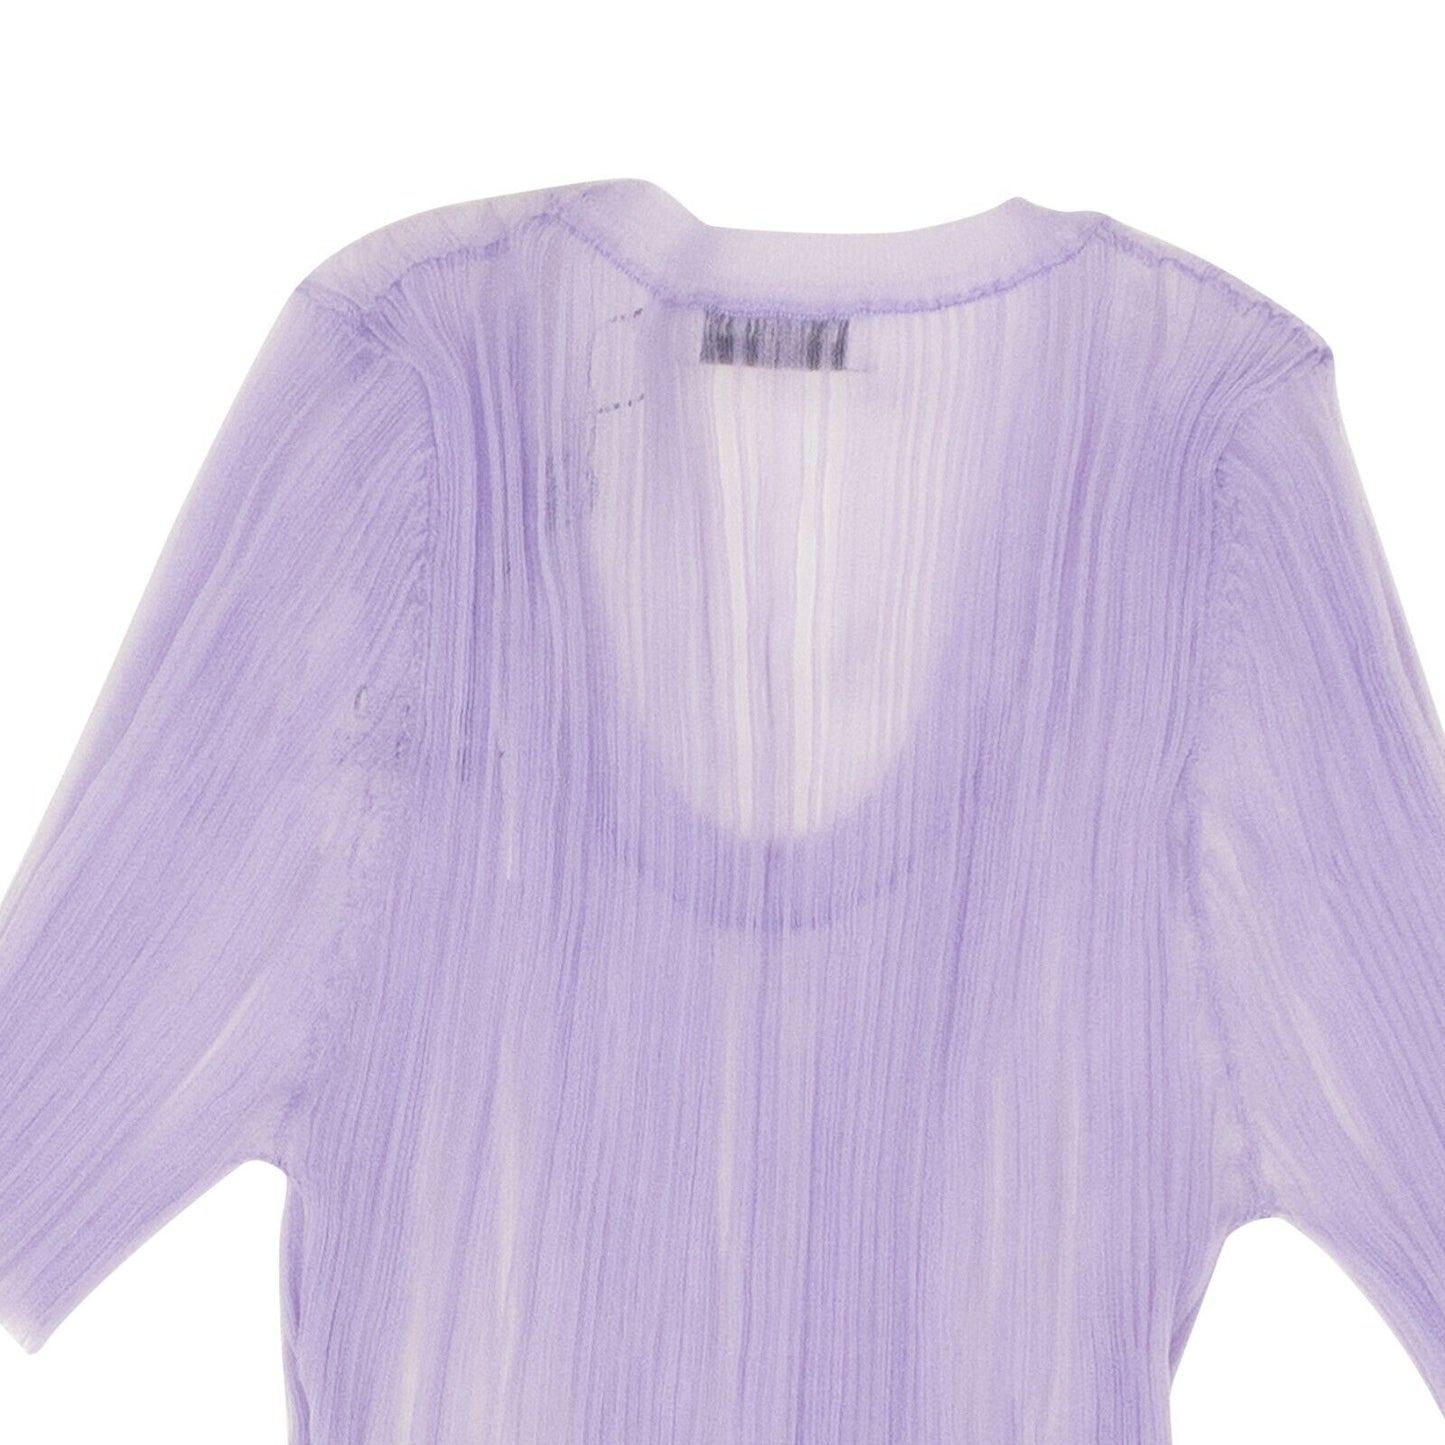 Opening Ceremony S/S Sheer Ribbed Top - Lilac